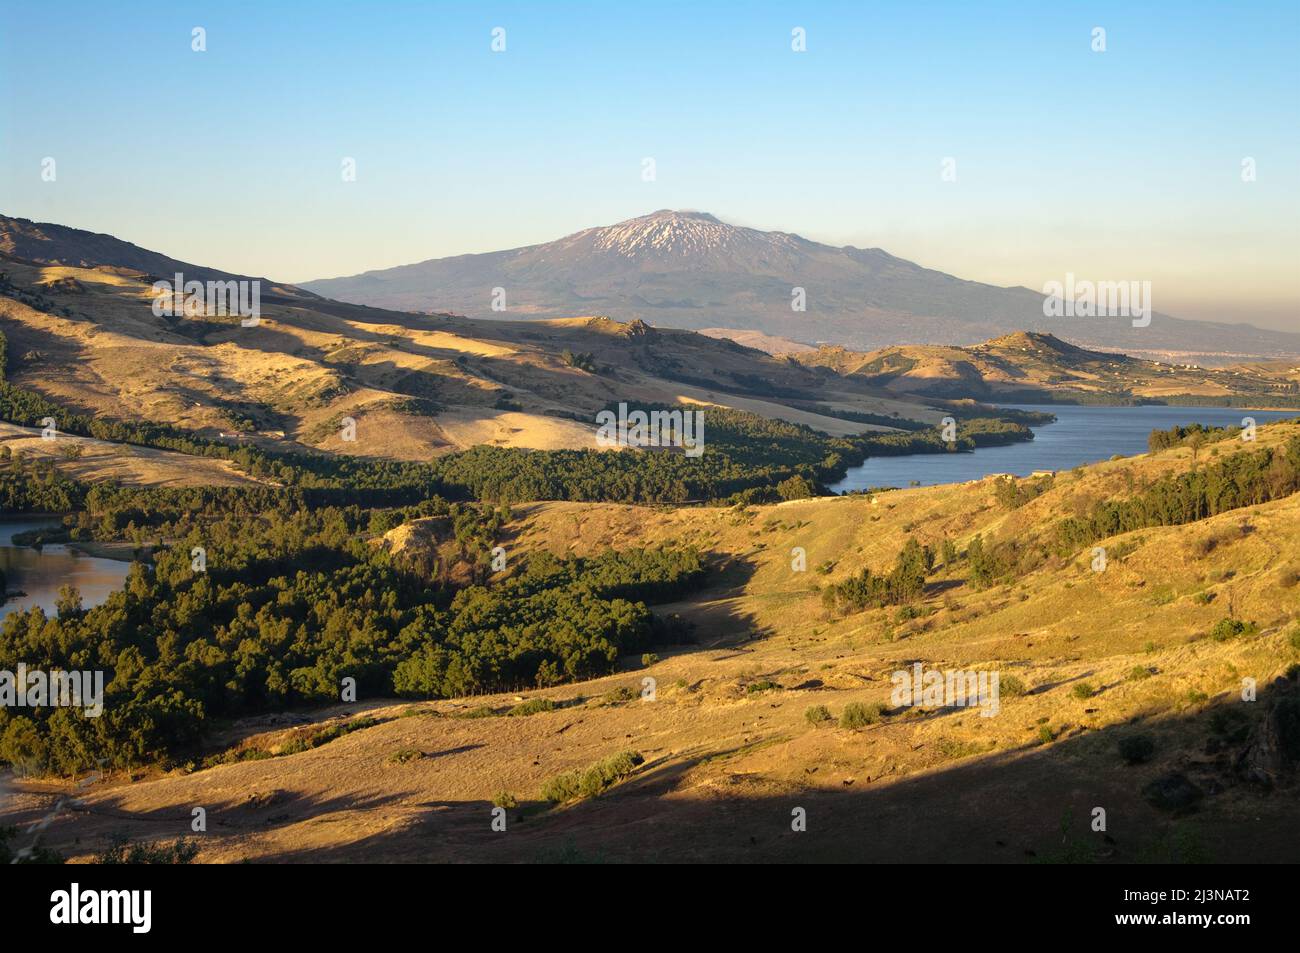 view from Agira on hinterland and Pozzillo Lake, on background volcano Etna Stock Photo